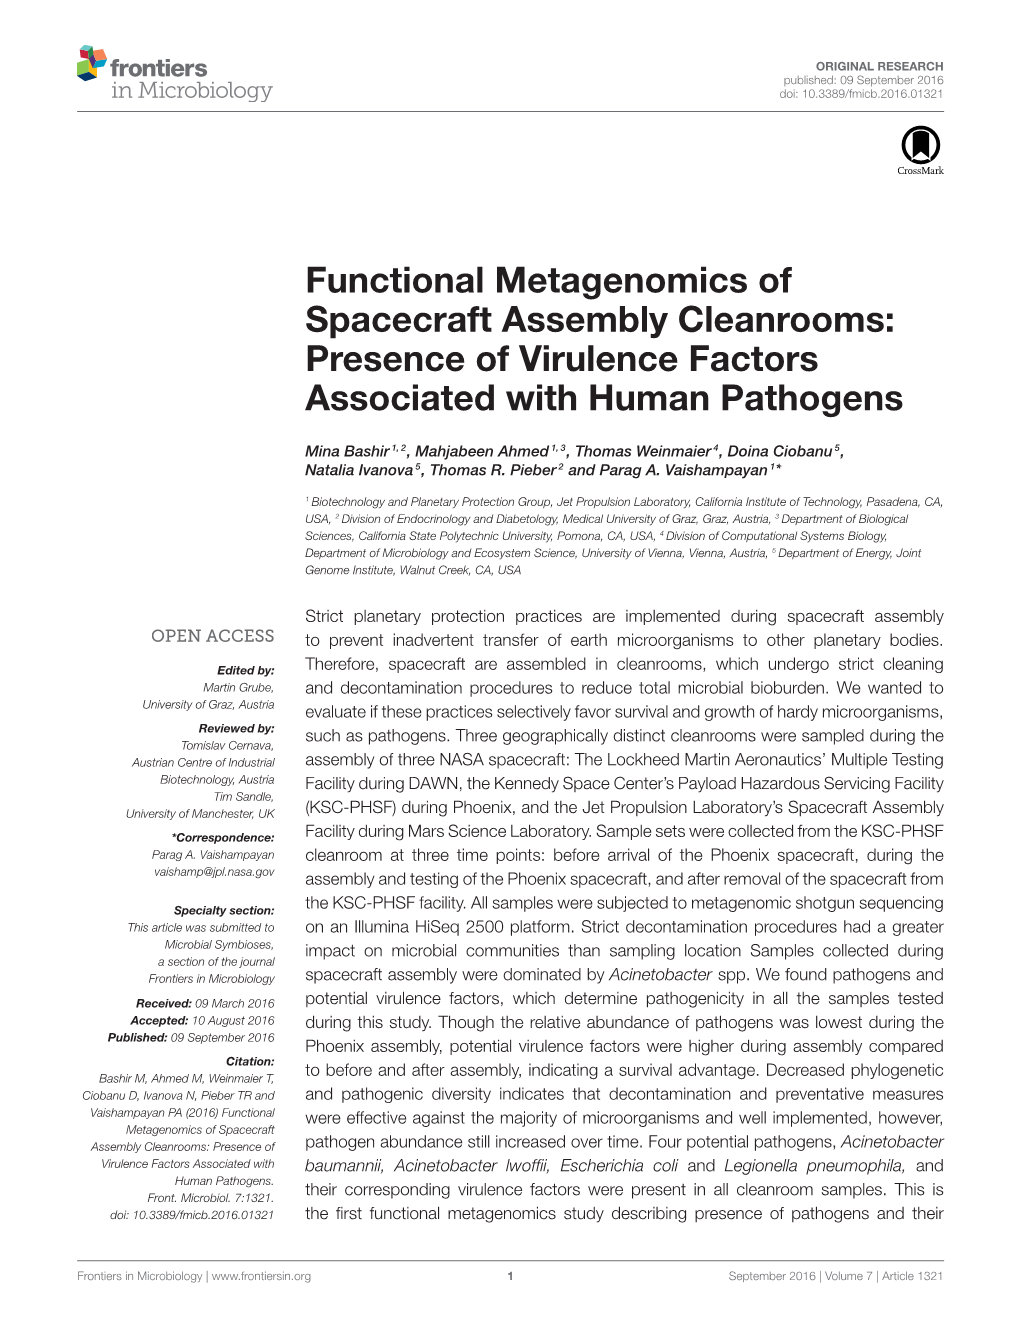 Functional Metagenomics of Spacecraft Assembly Cleanrooms: Presence of Virulence Factors Associated with Human Pathogens